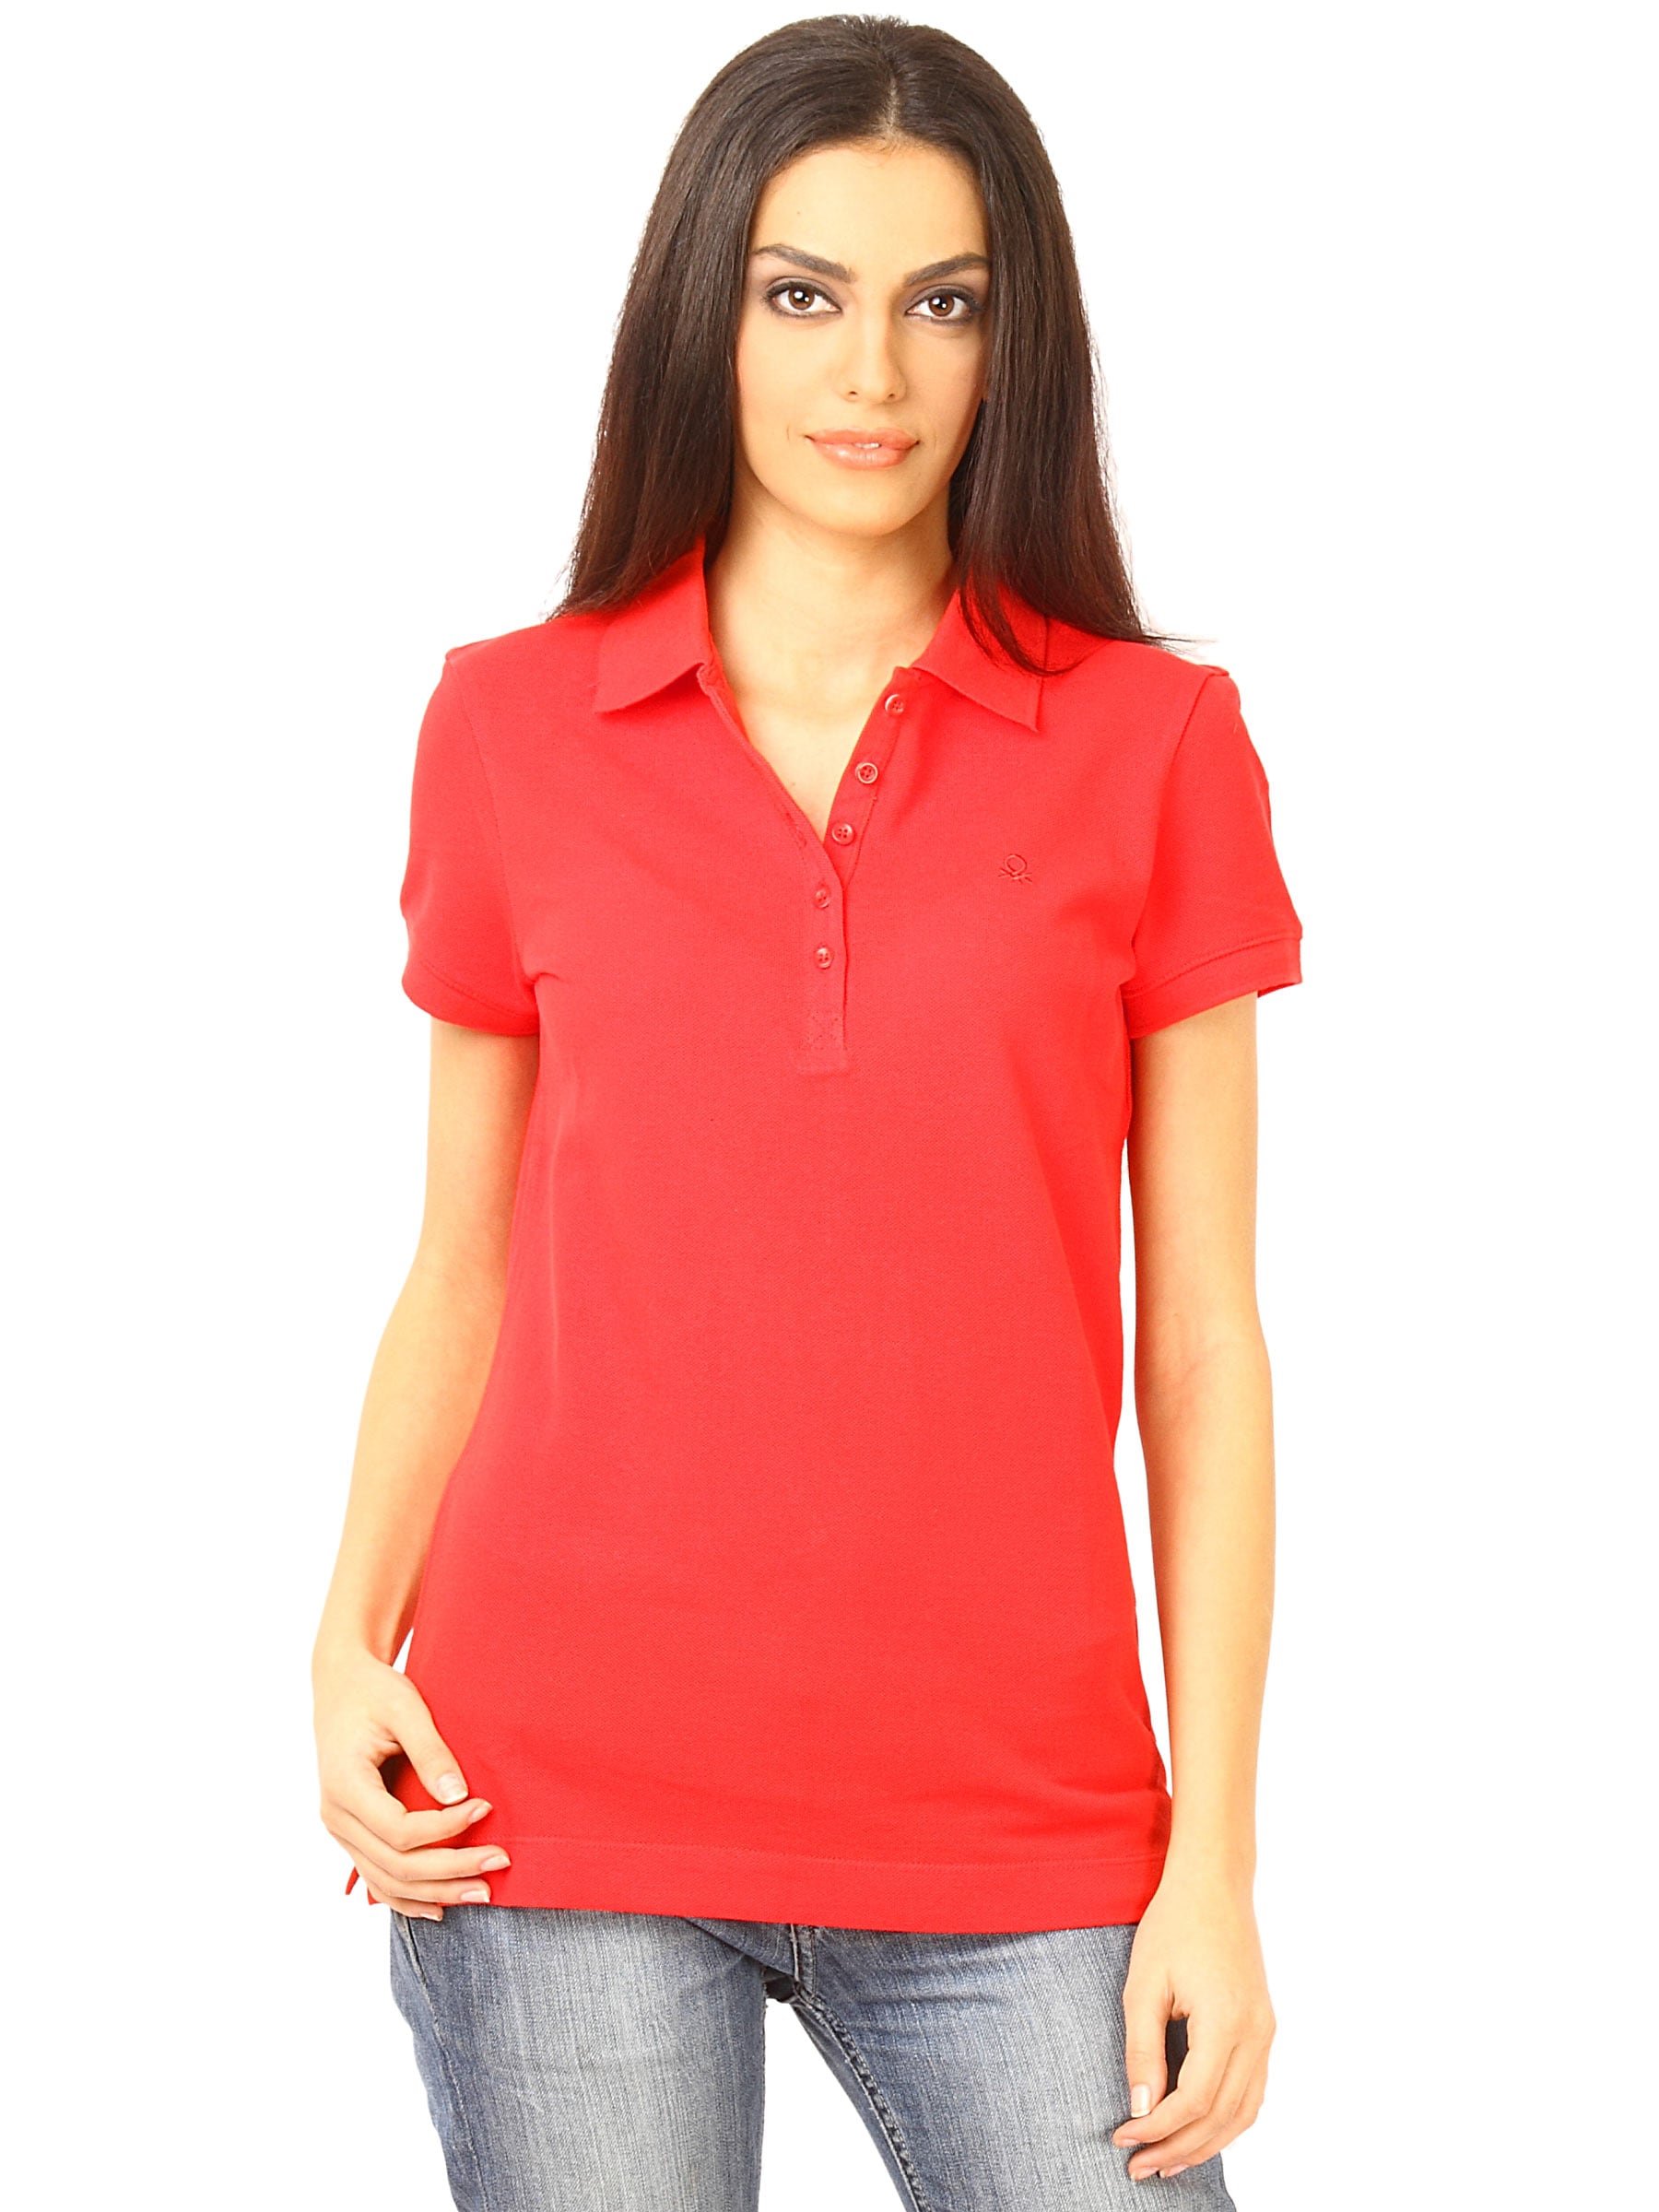 United Colors of Benetton Women Red Polo T-shirt